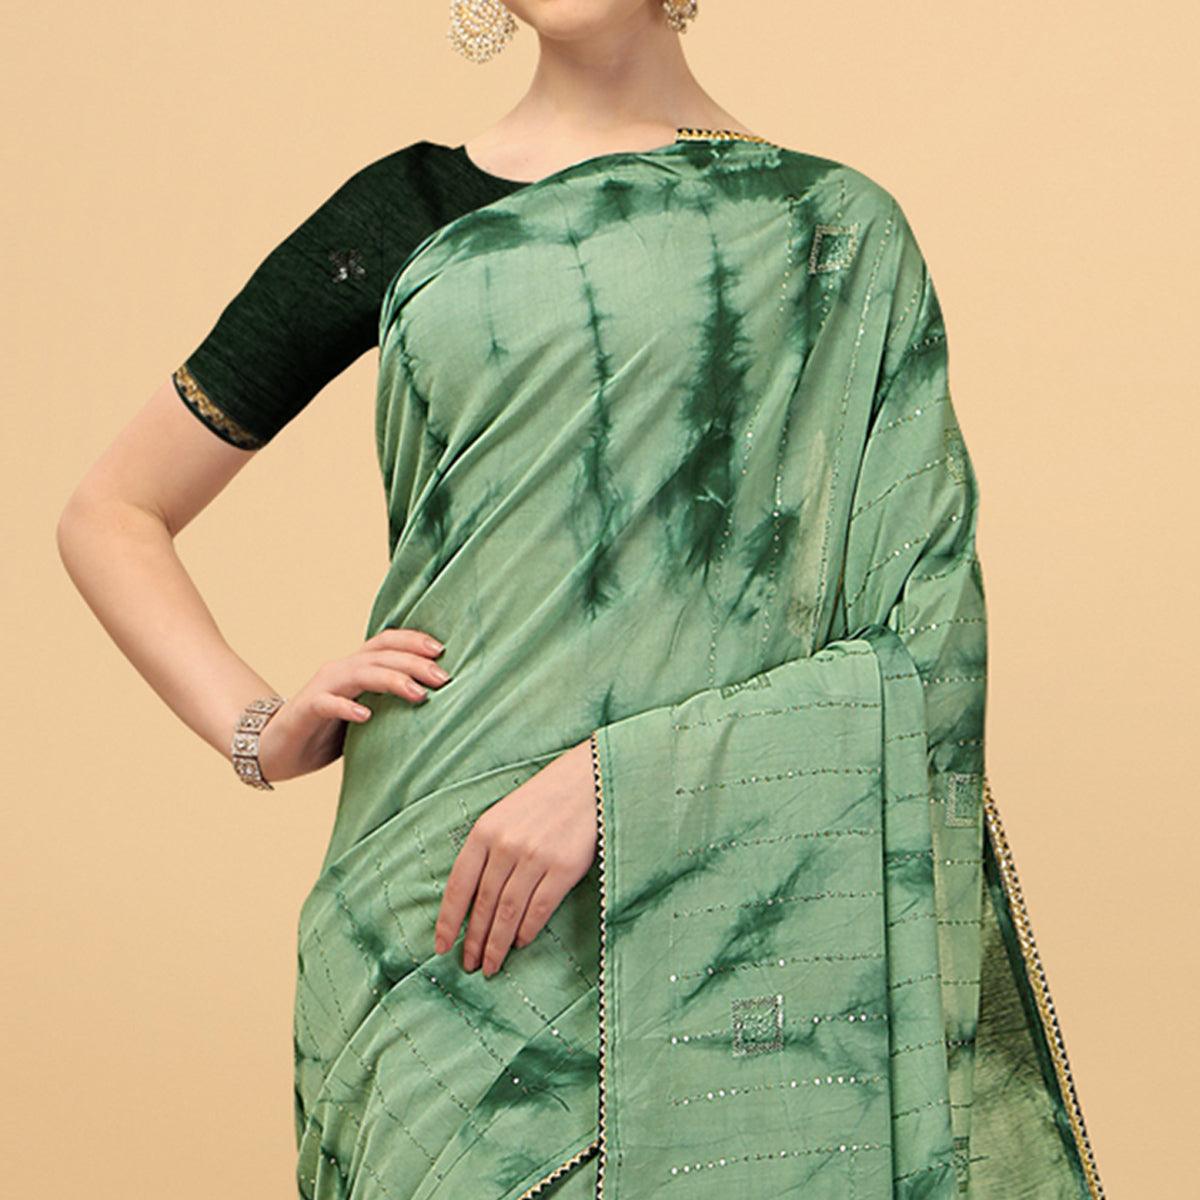 Light Green Sequence Embroidered Chanderi Saree - Peachmode